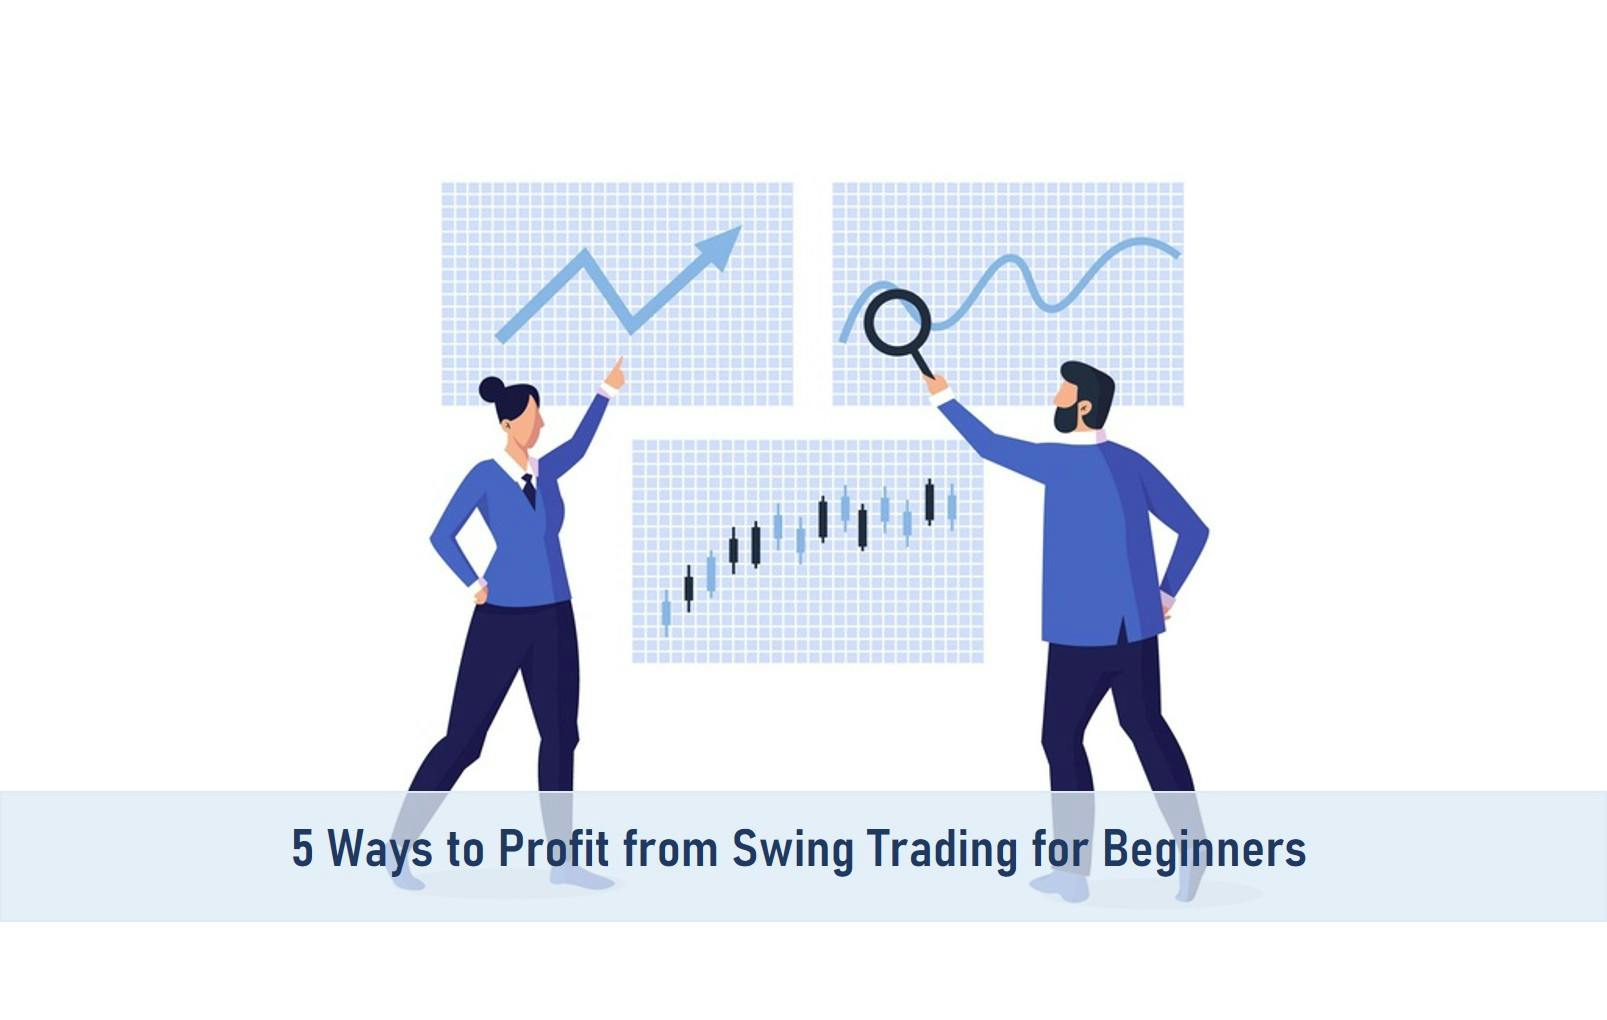 5 Ways to Profit from Swing Trading for Beginners